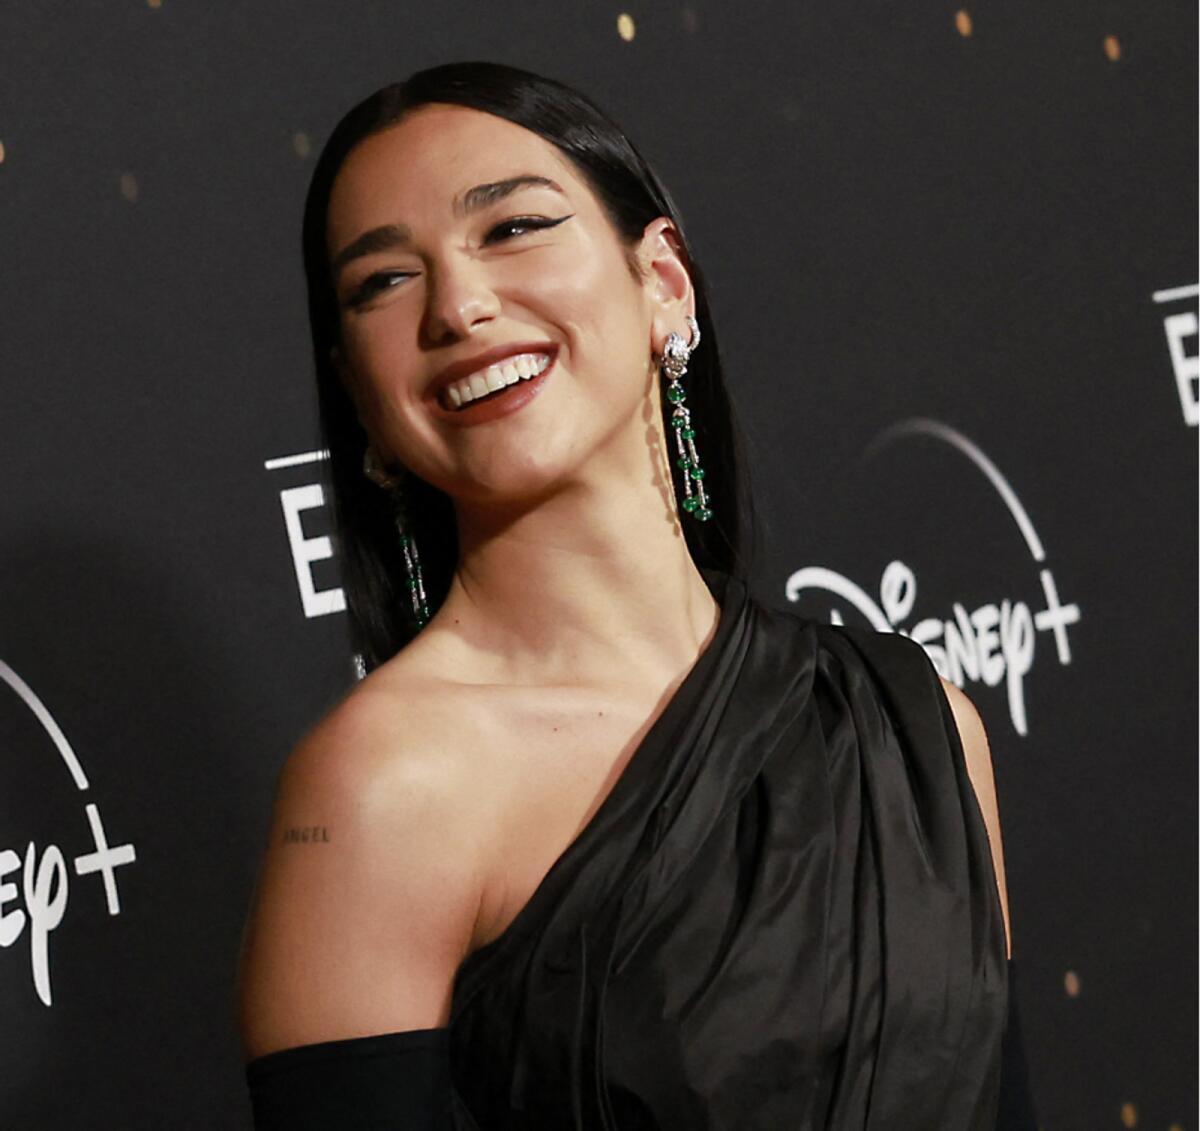 In 2018, Dua Lipa robotically twisted her hips back and forth during a performance of her single One Kiss. A recording went viral, inspiring countless memes that poked fun at her on social media.